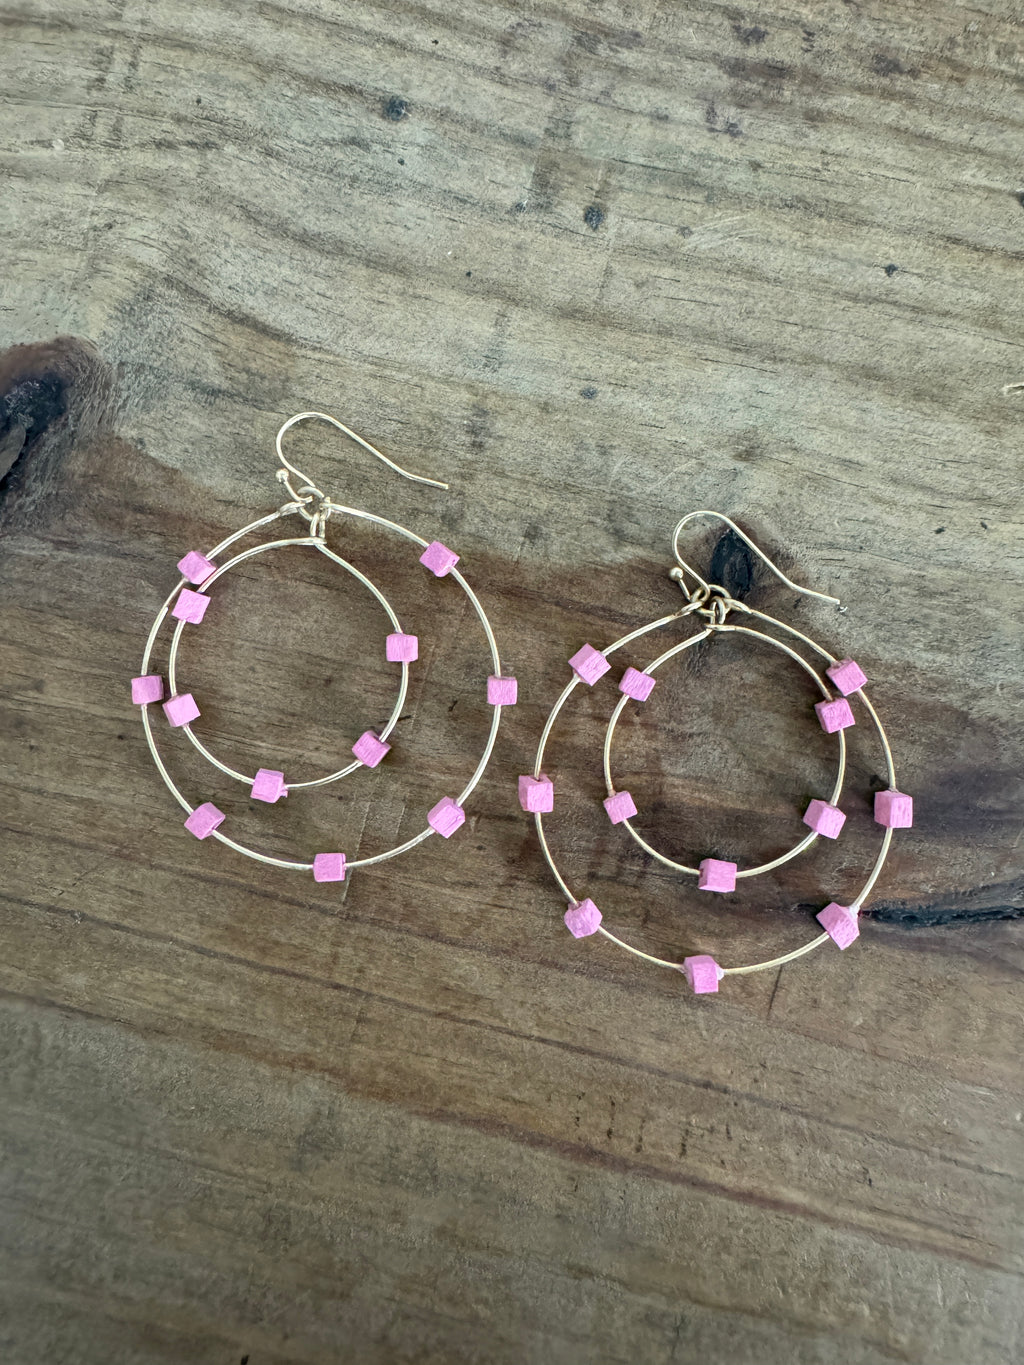 2- Tier Hoop Earrings with Wood Accents